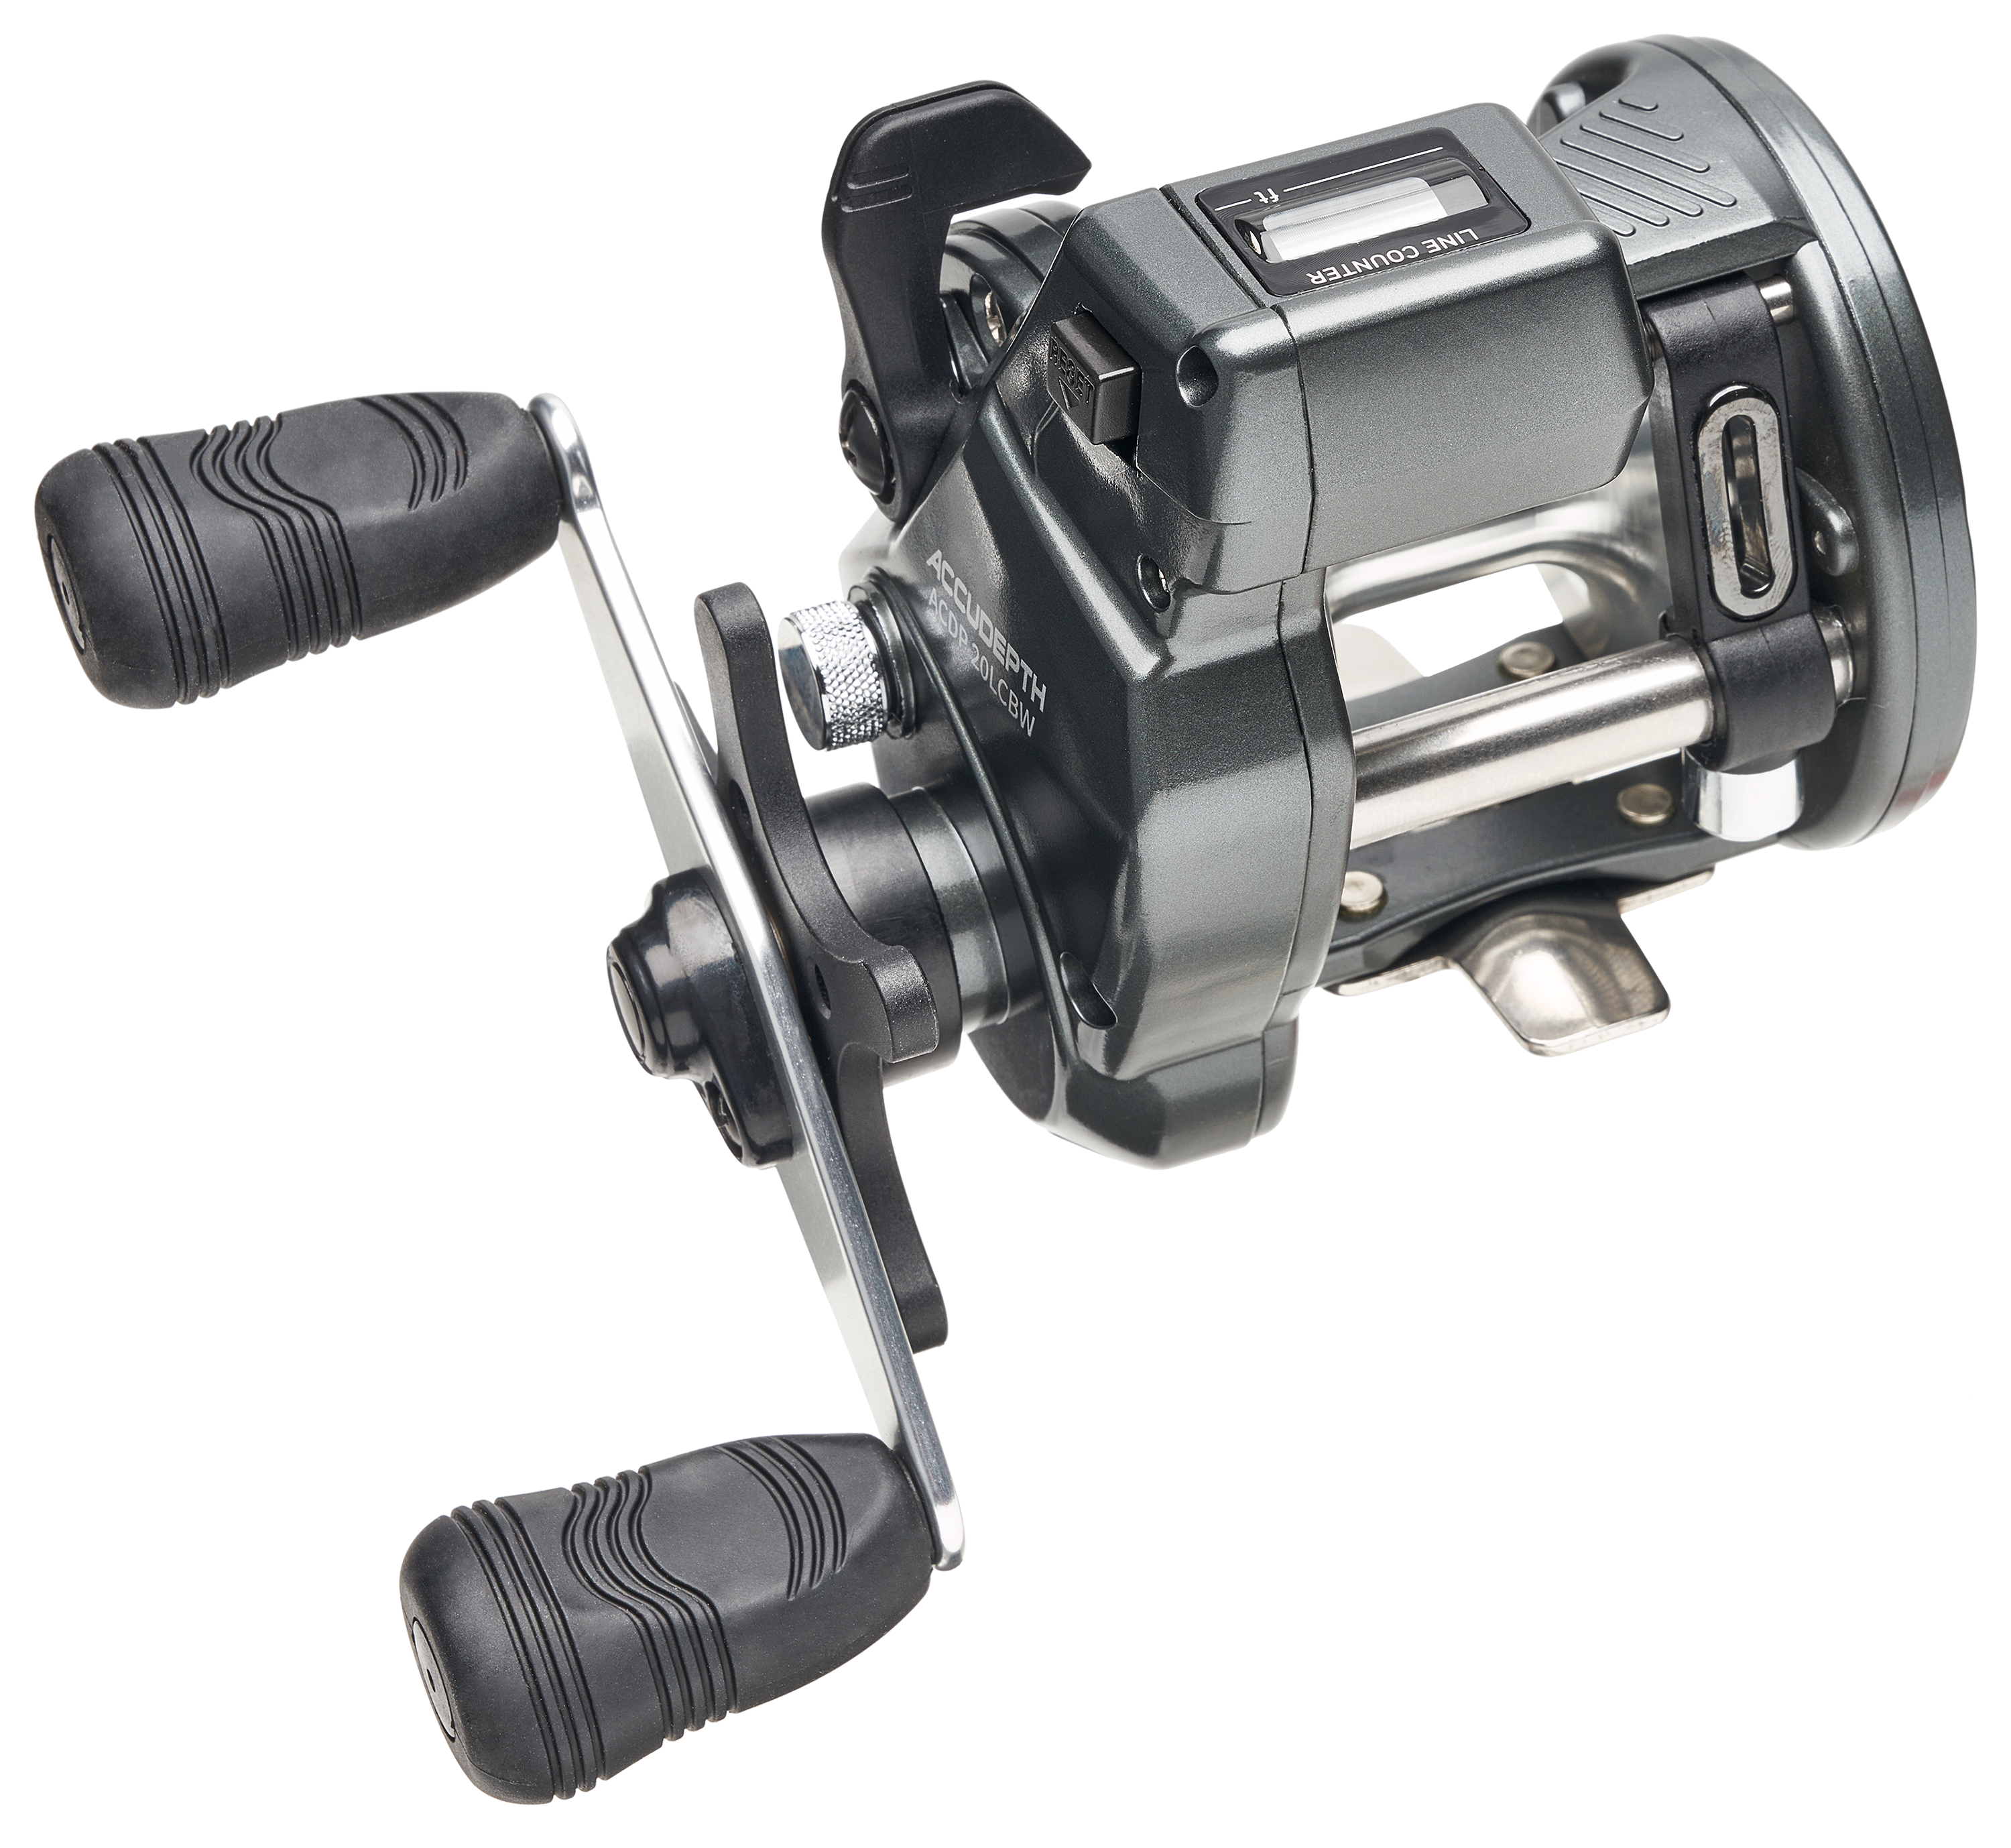 Daiwa Accudepth Plus-B Line Counter Levelwind Fishing Reel (Silver, 47) :  Buy Online at Best Price in KSA - Souq is now : Sporting Goods